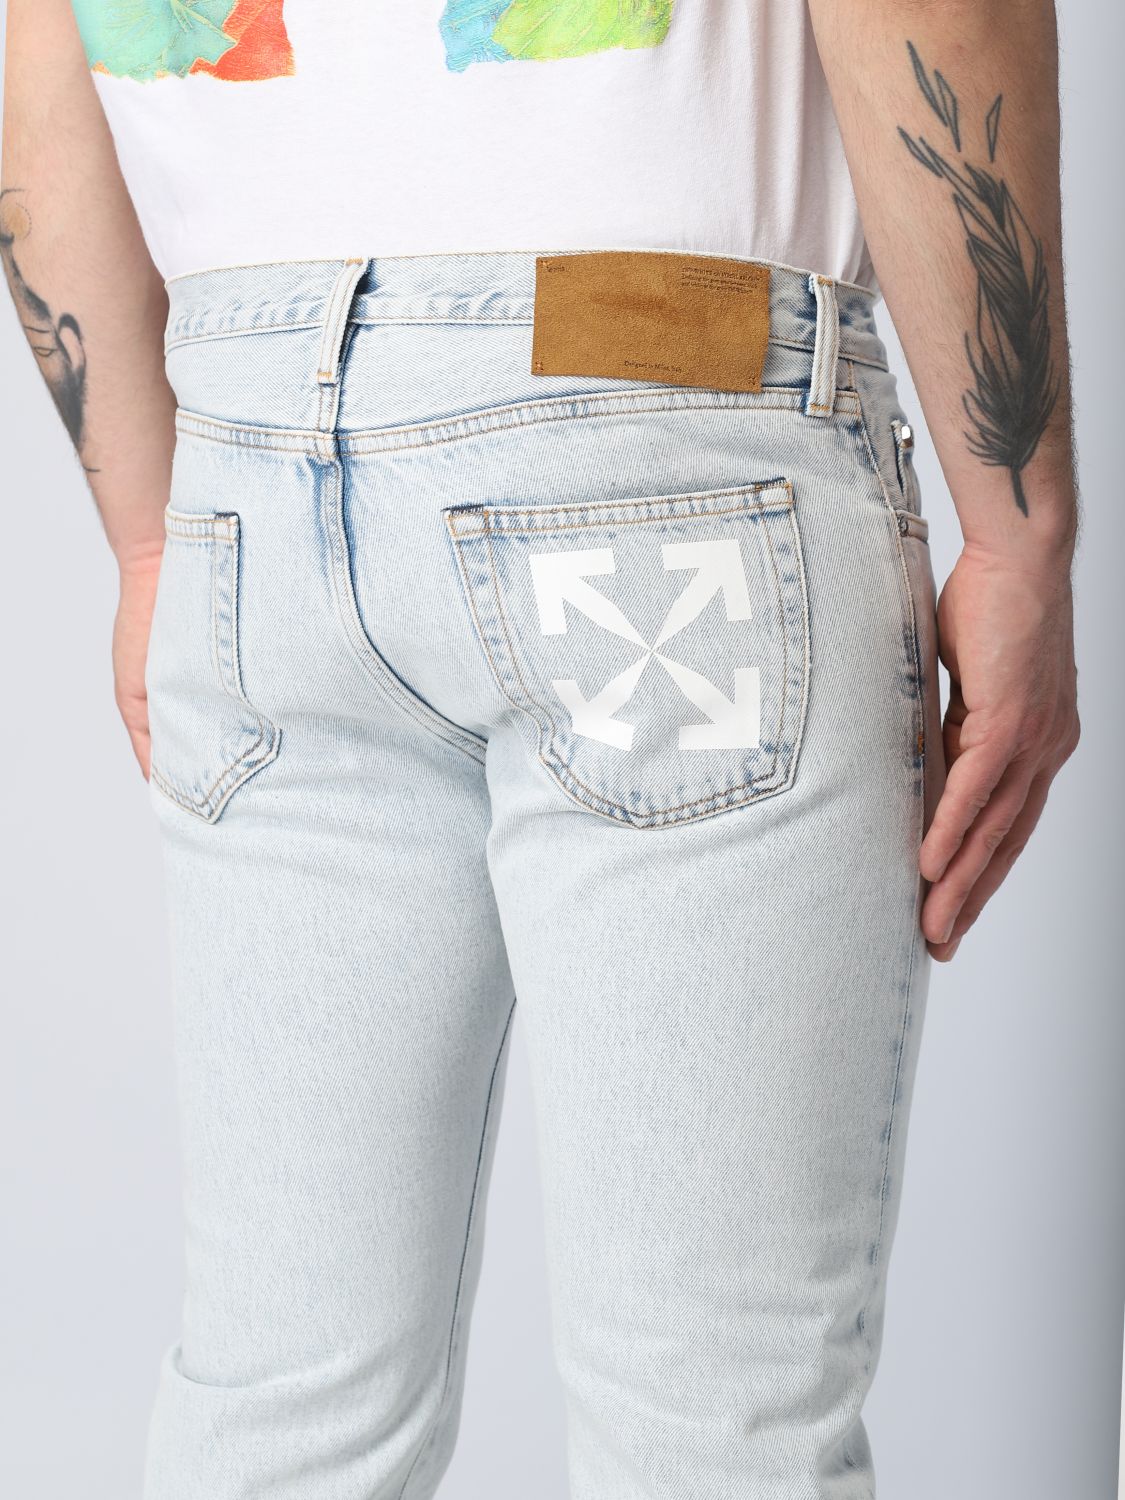 jeans for man - Denim | Off-White jeans on